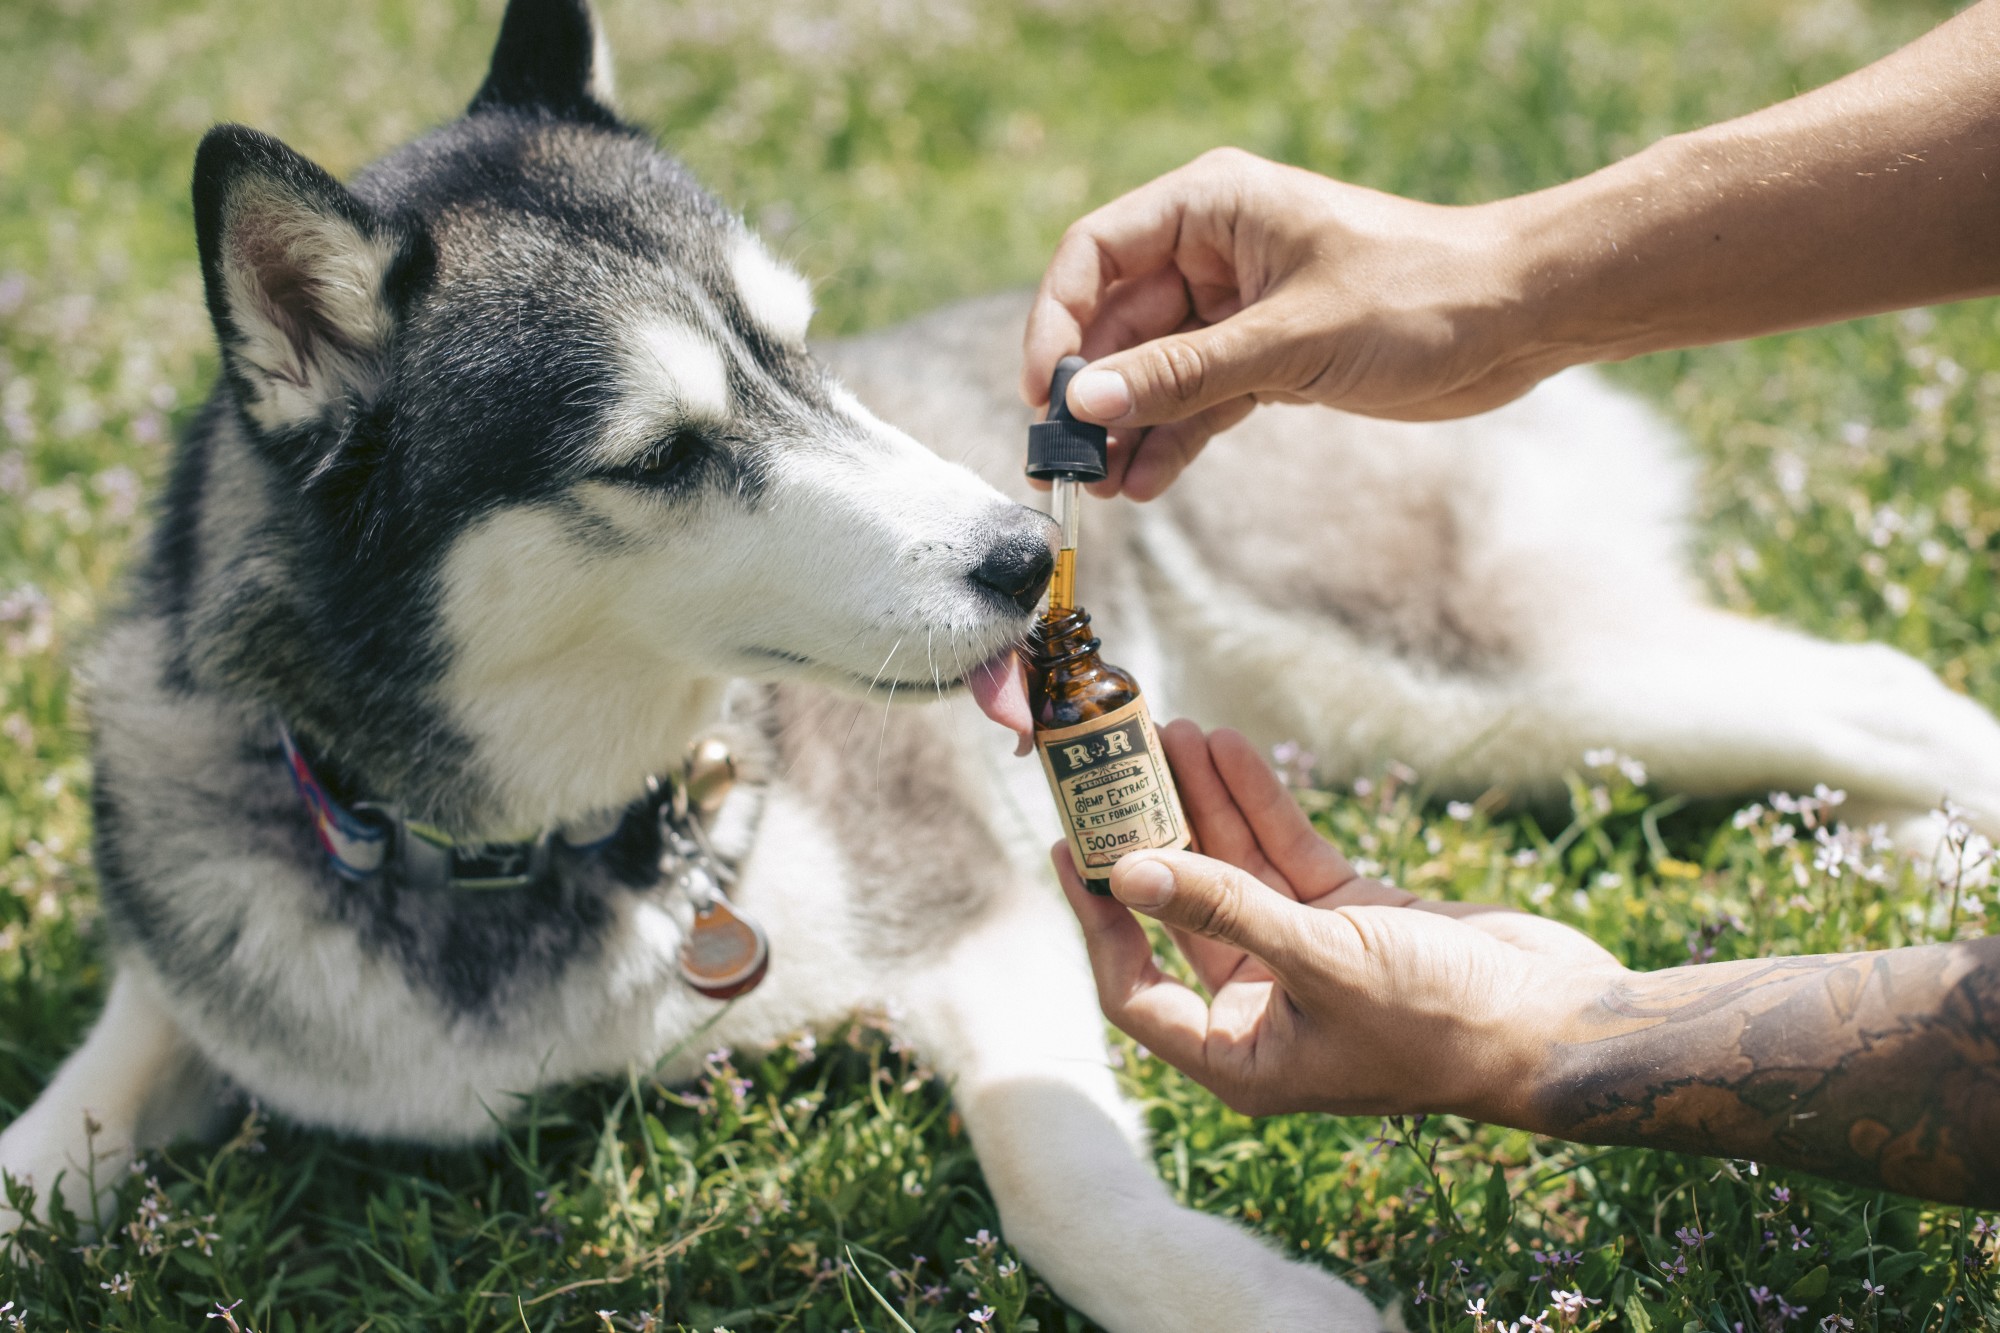 Finding the right CBD products for your dog requires knowing your options. Here is the complete guide for new owners on how to buy CBD for dogs.